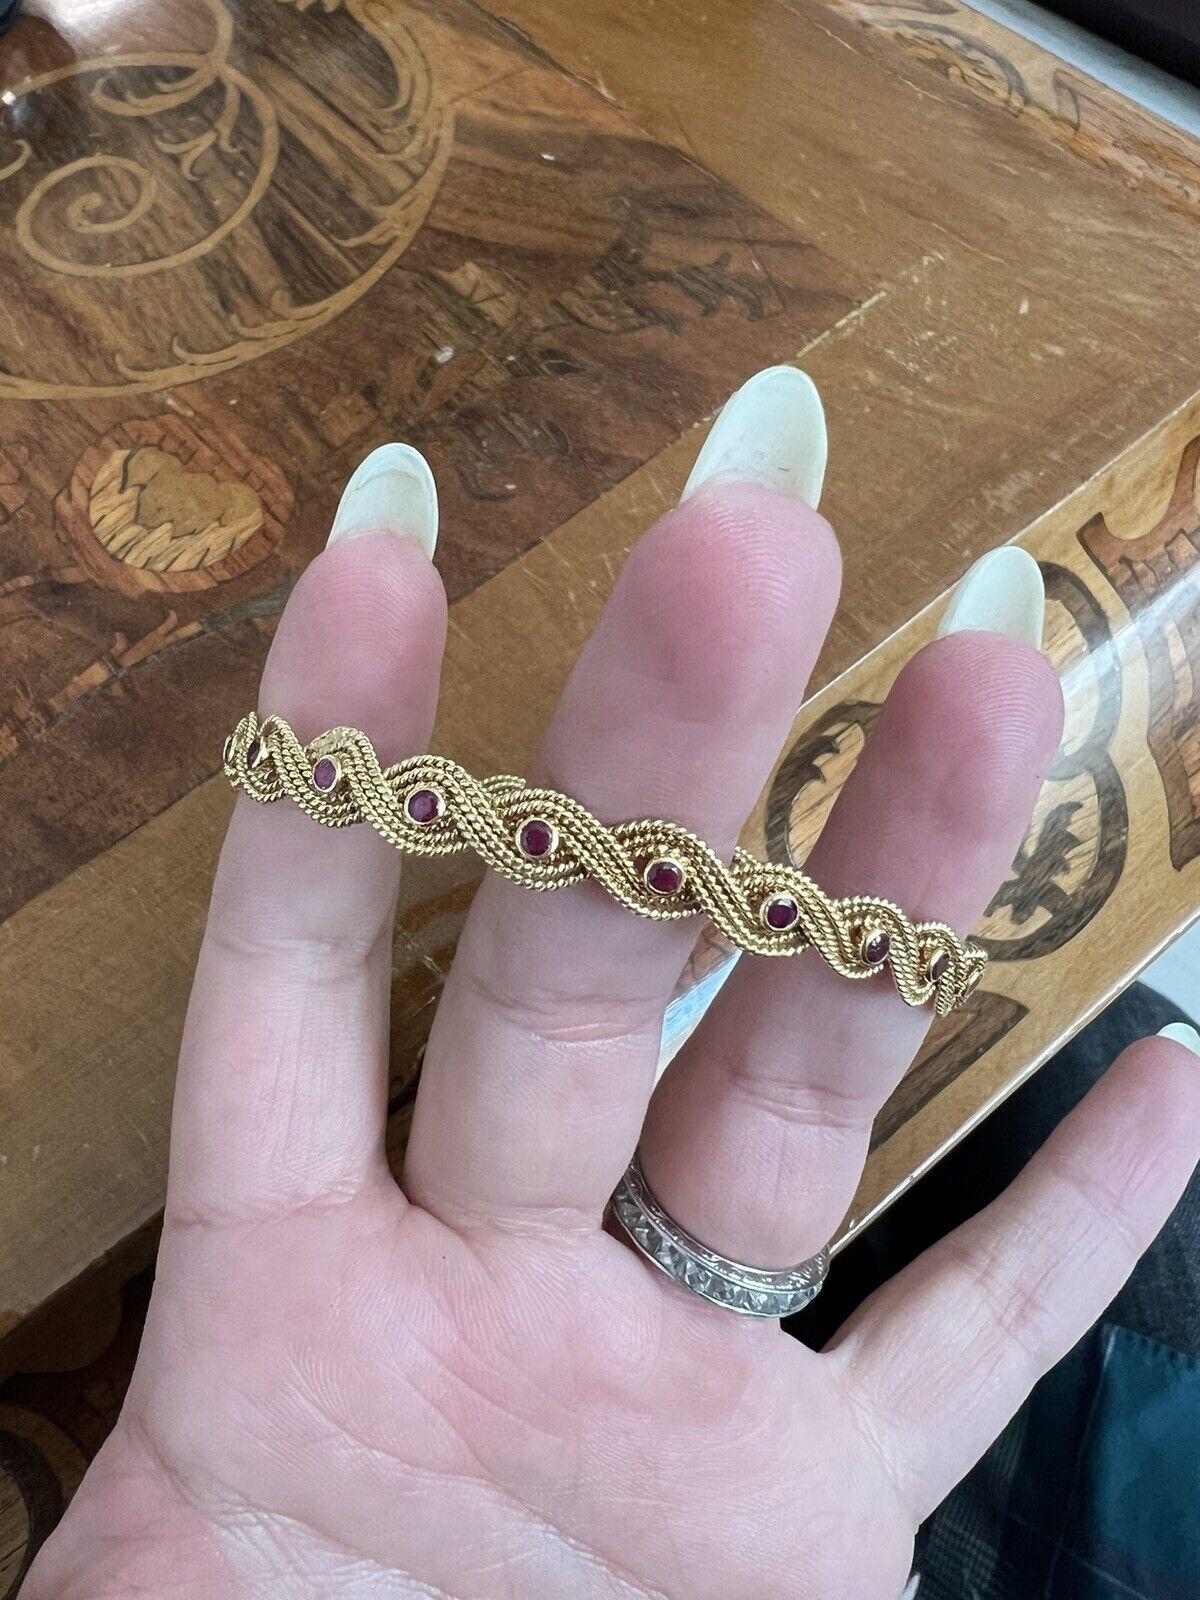 Boucheron Paris 18k Yellow Gold & Ruby Woven Bangle Bracelet Circa 1960s Vintage

Here is your chance to purchase a beautiful and highly collectible designer bangle bracelet.  

Vintage Boucheron Paris Woven 18k yellow gold & ruby bangle bracelet